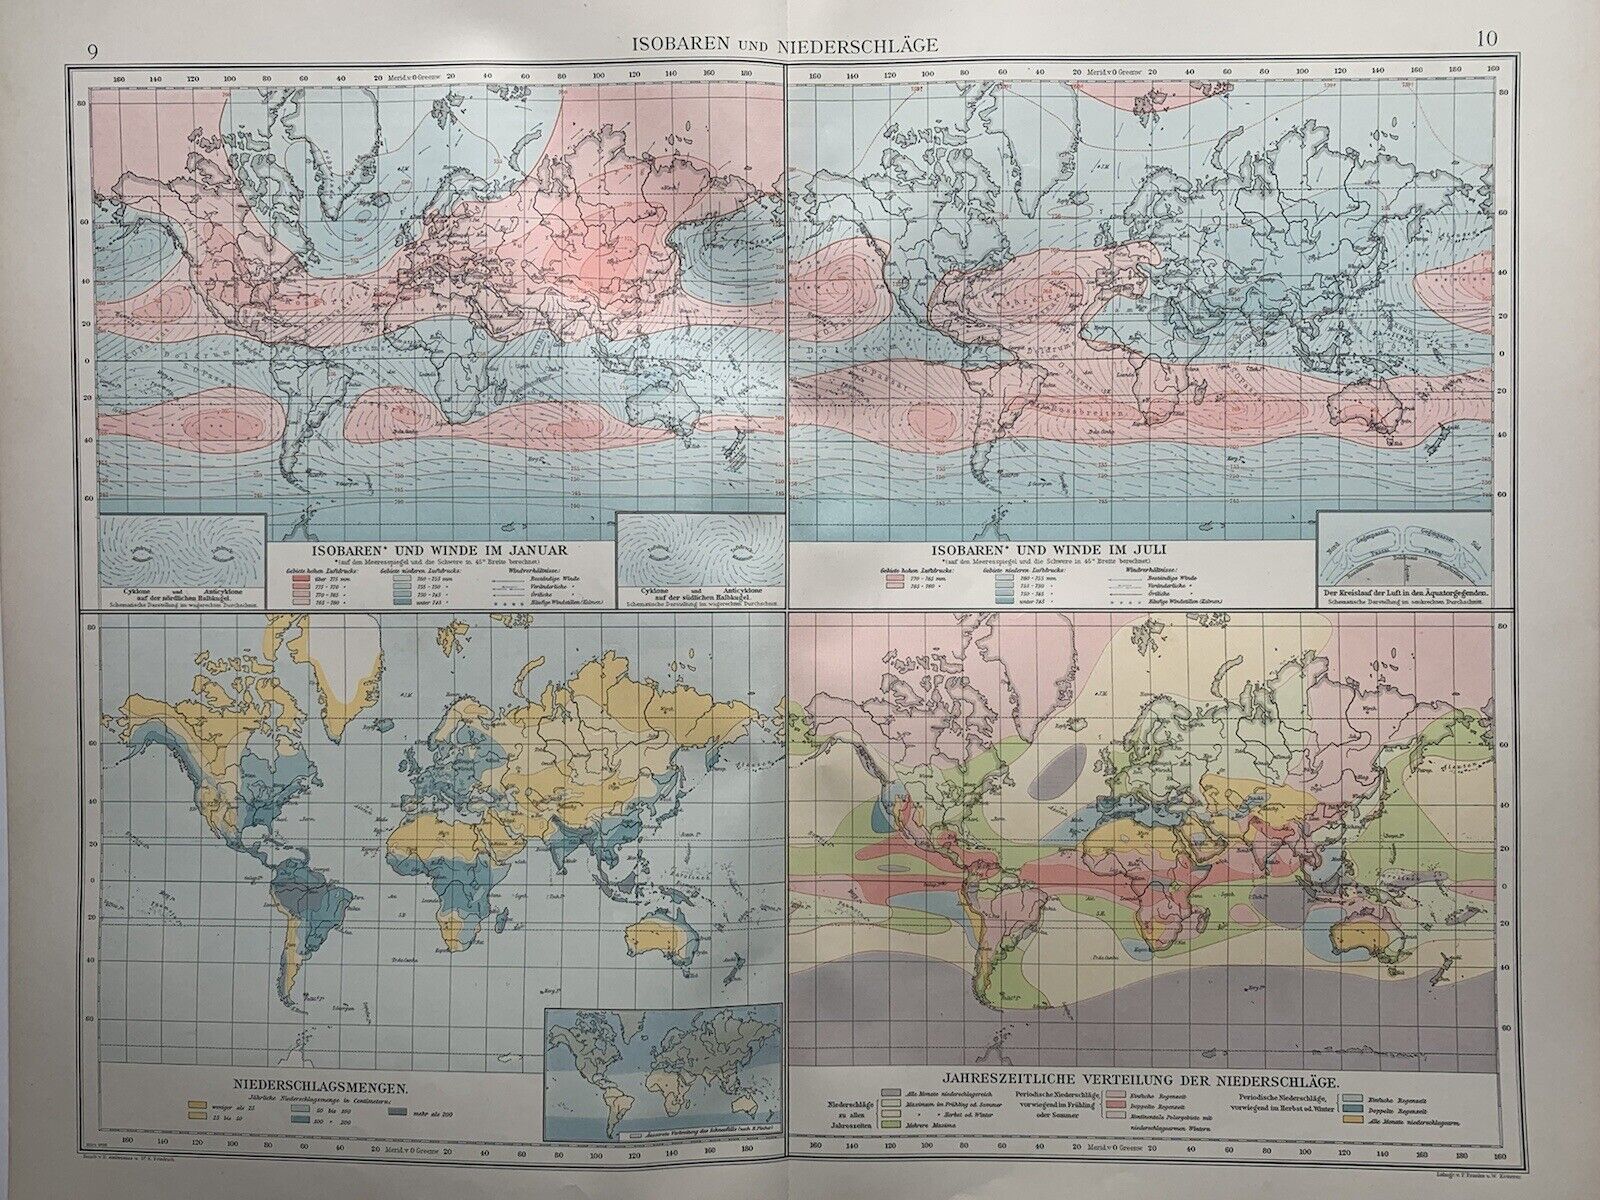 1899 World Isobar Rainfall Meteorological Chart Antique Map by Richard Andree